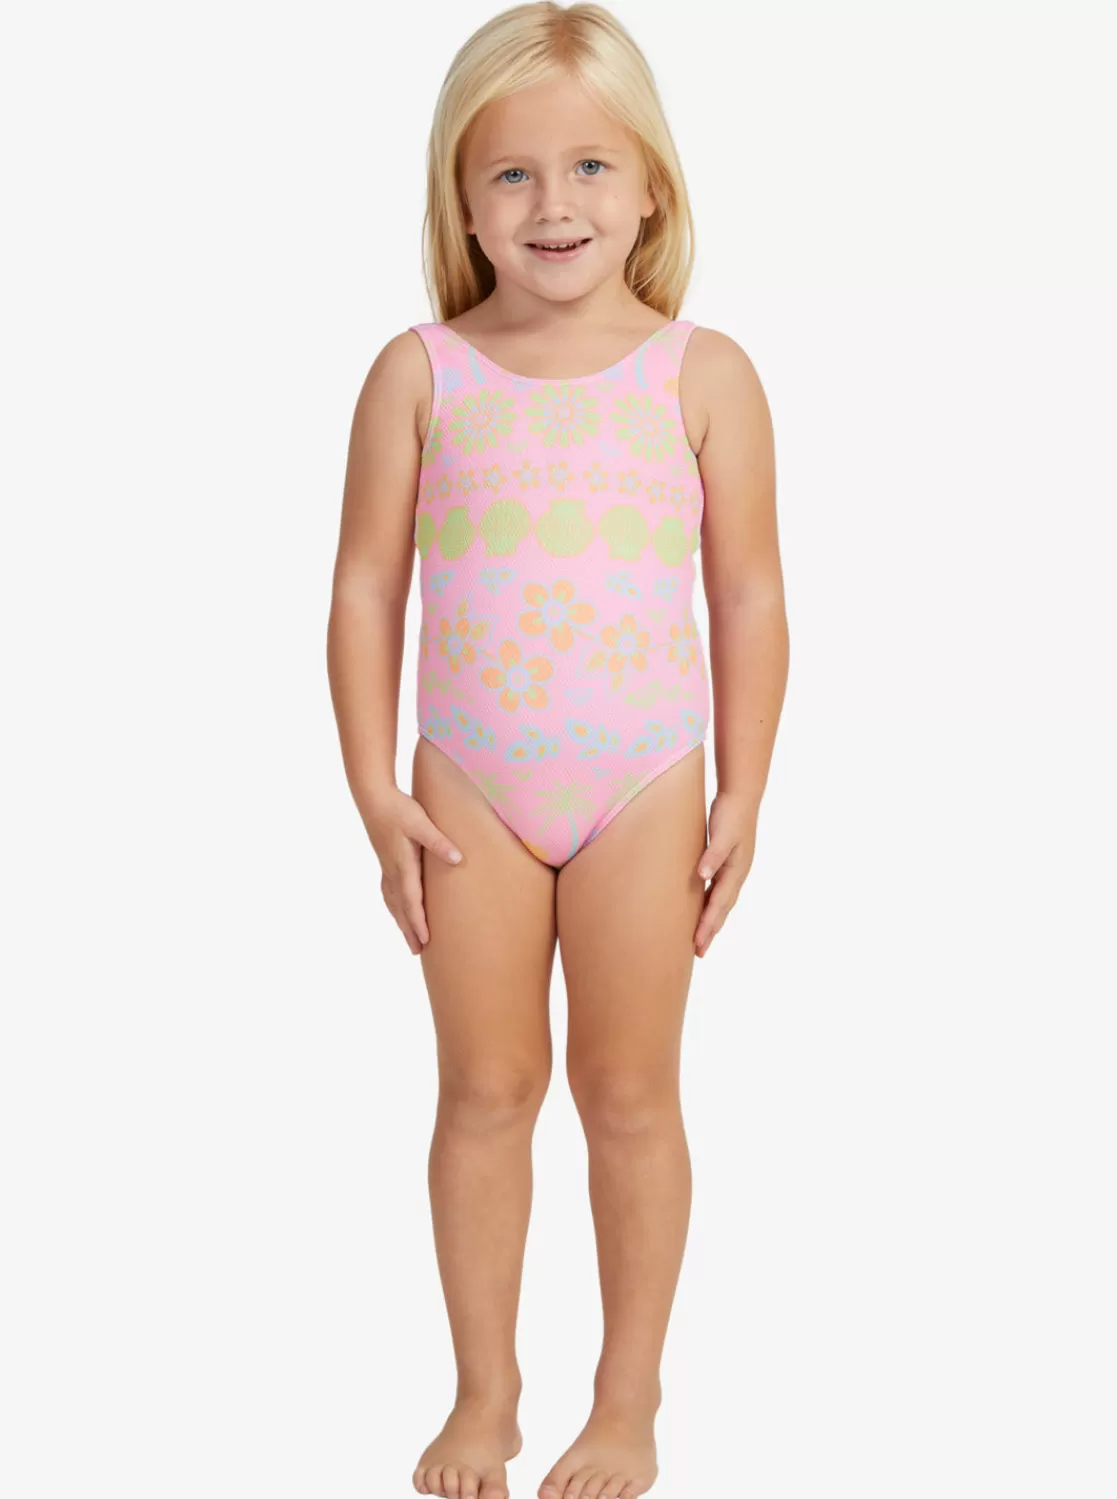 Girls 2-7 Beach Day Together One-Piece Swimsuit-ROXY Shop